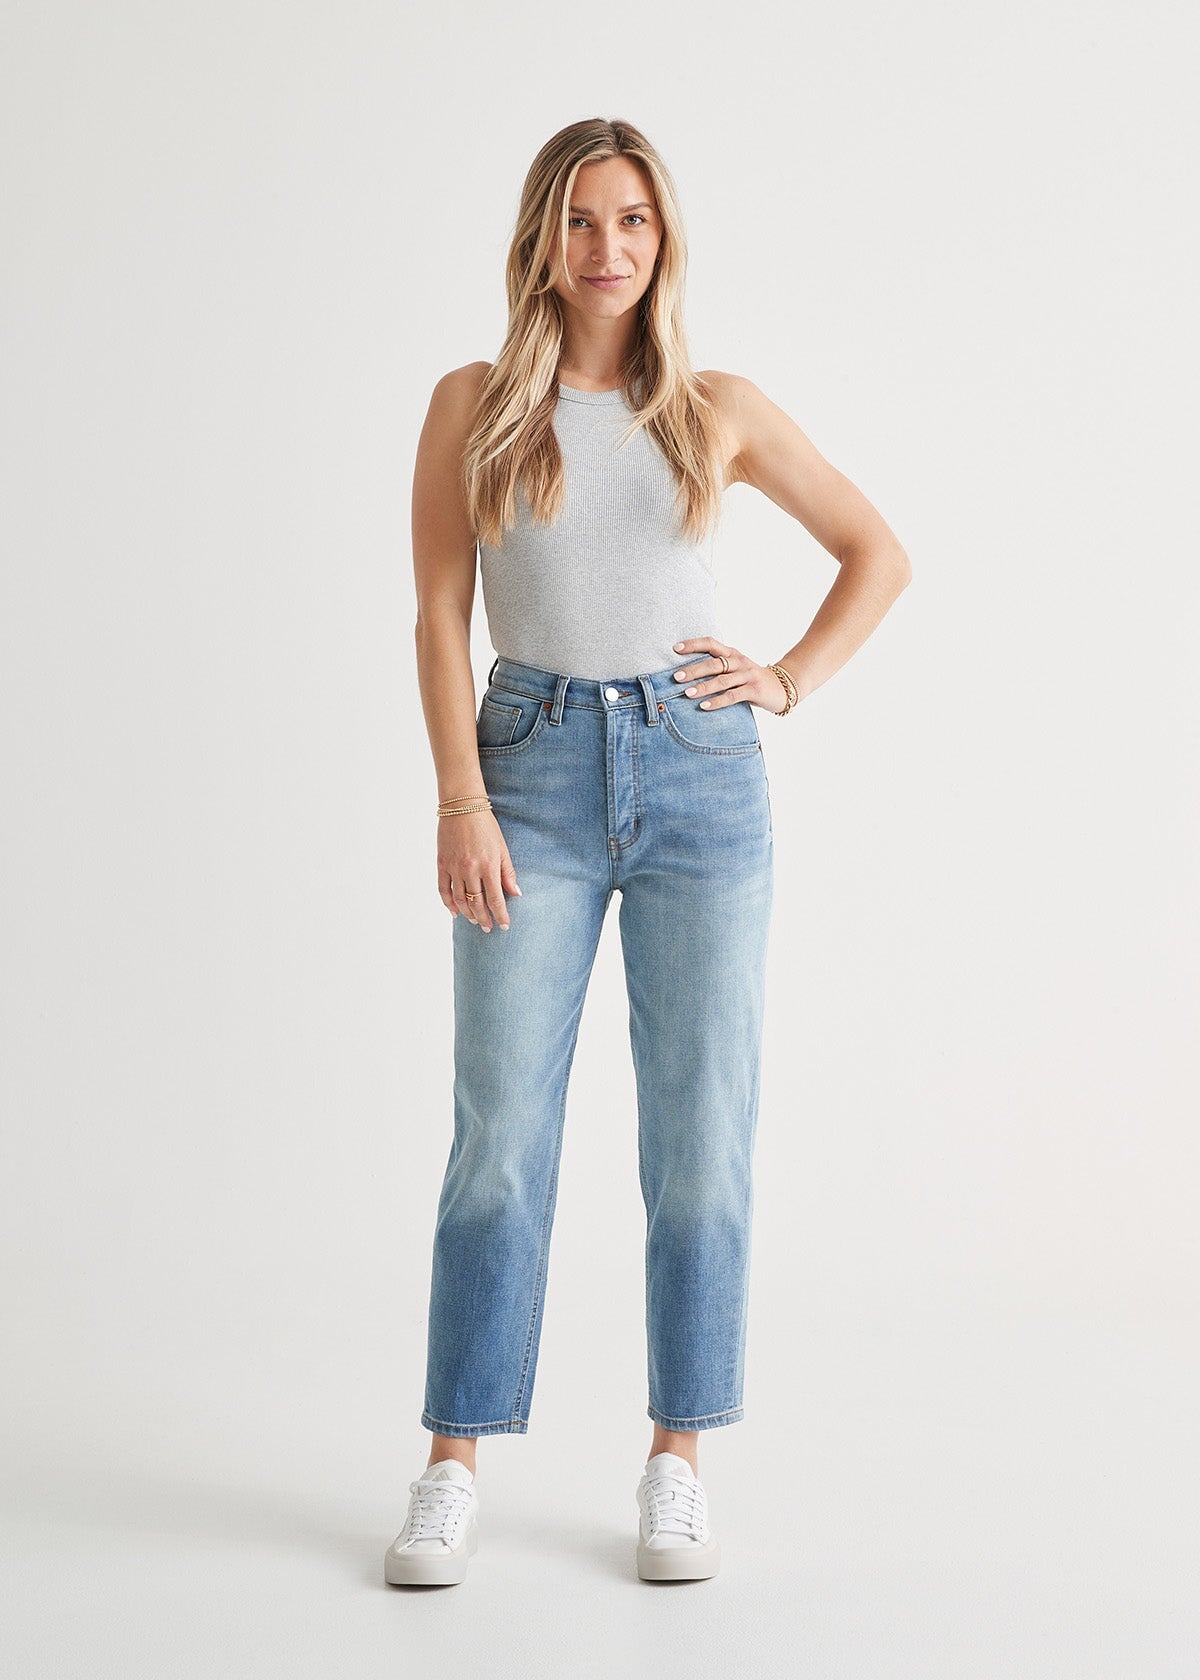 High Rise Vintage Soft Relaxed Pants